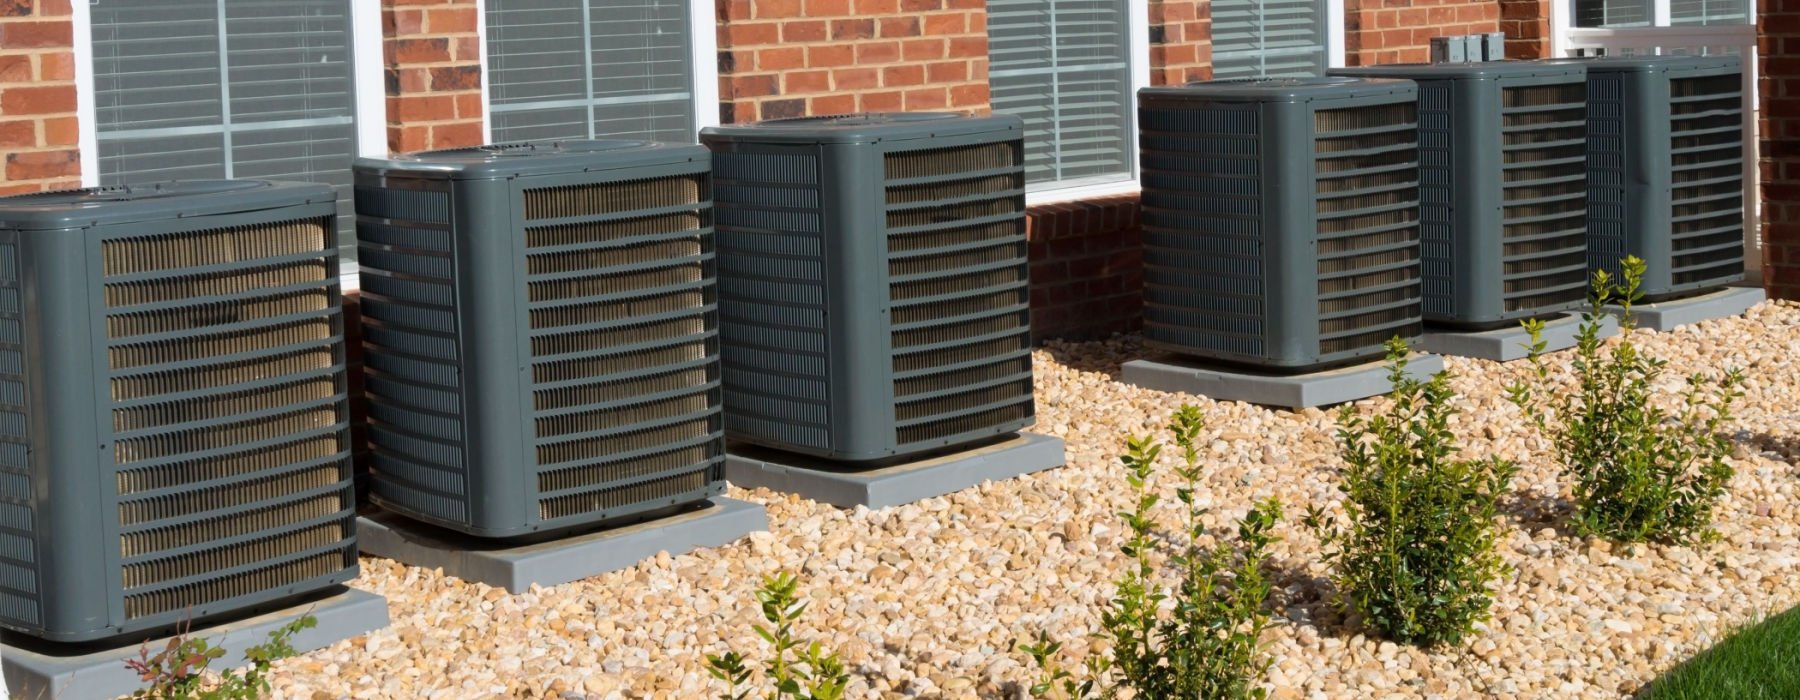 ENERGY STAR Air Conditioners and Heat Pumps: 2023 Efficiency Requirements